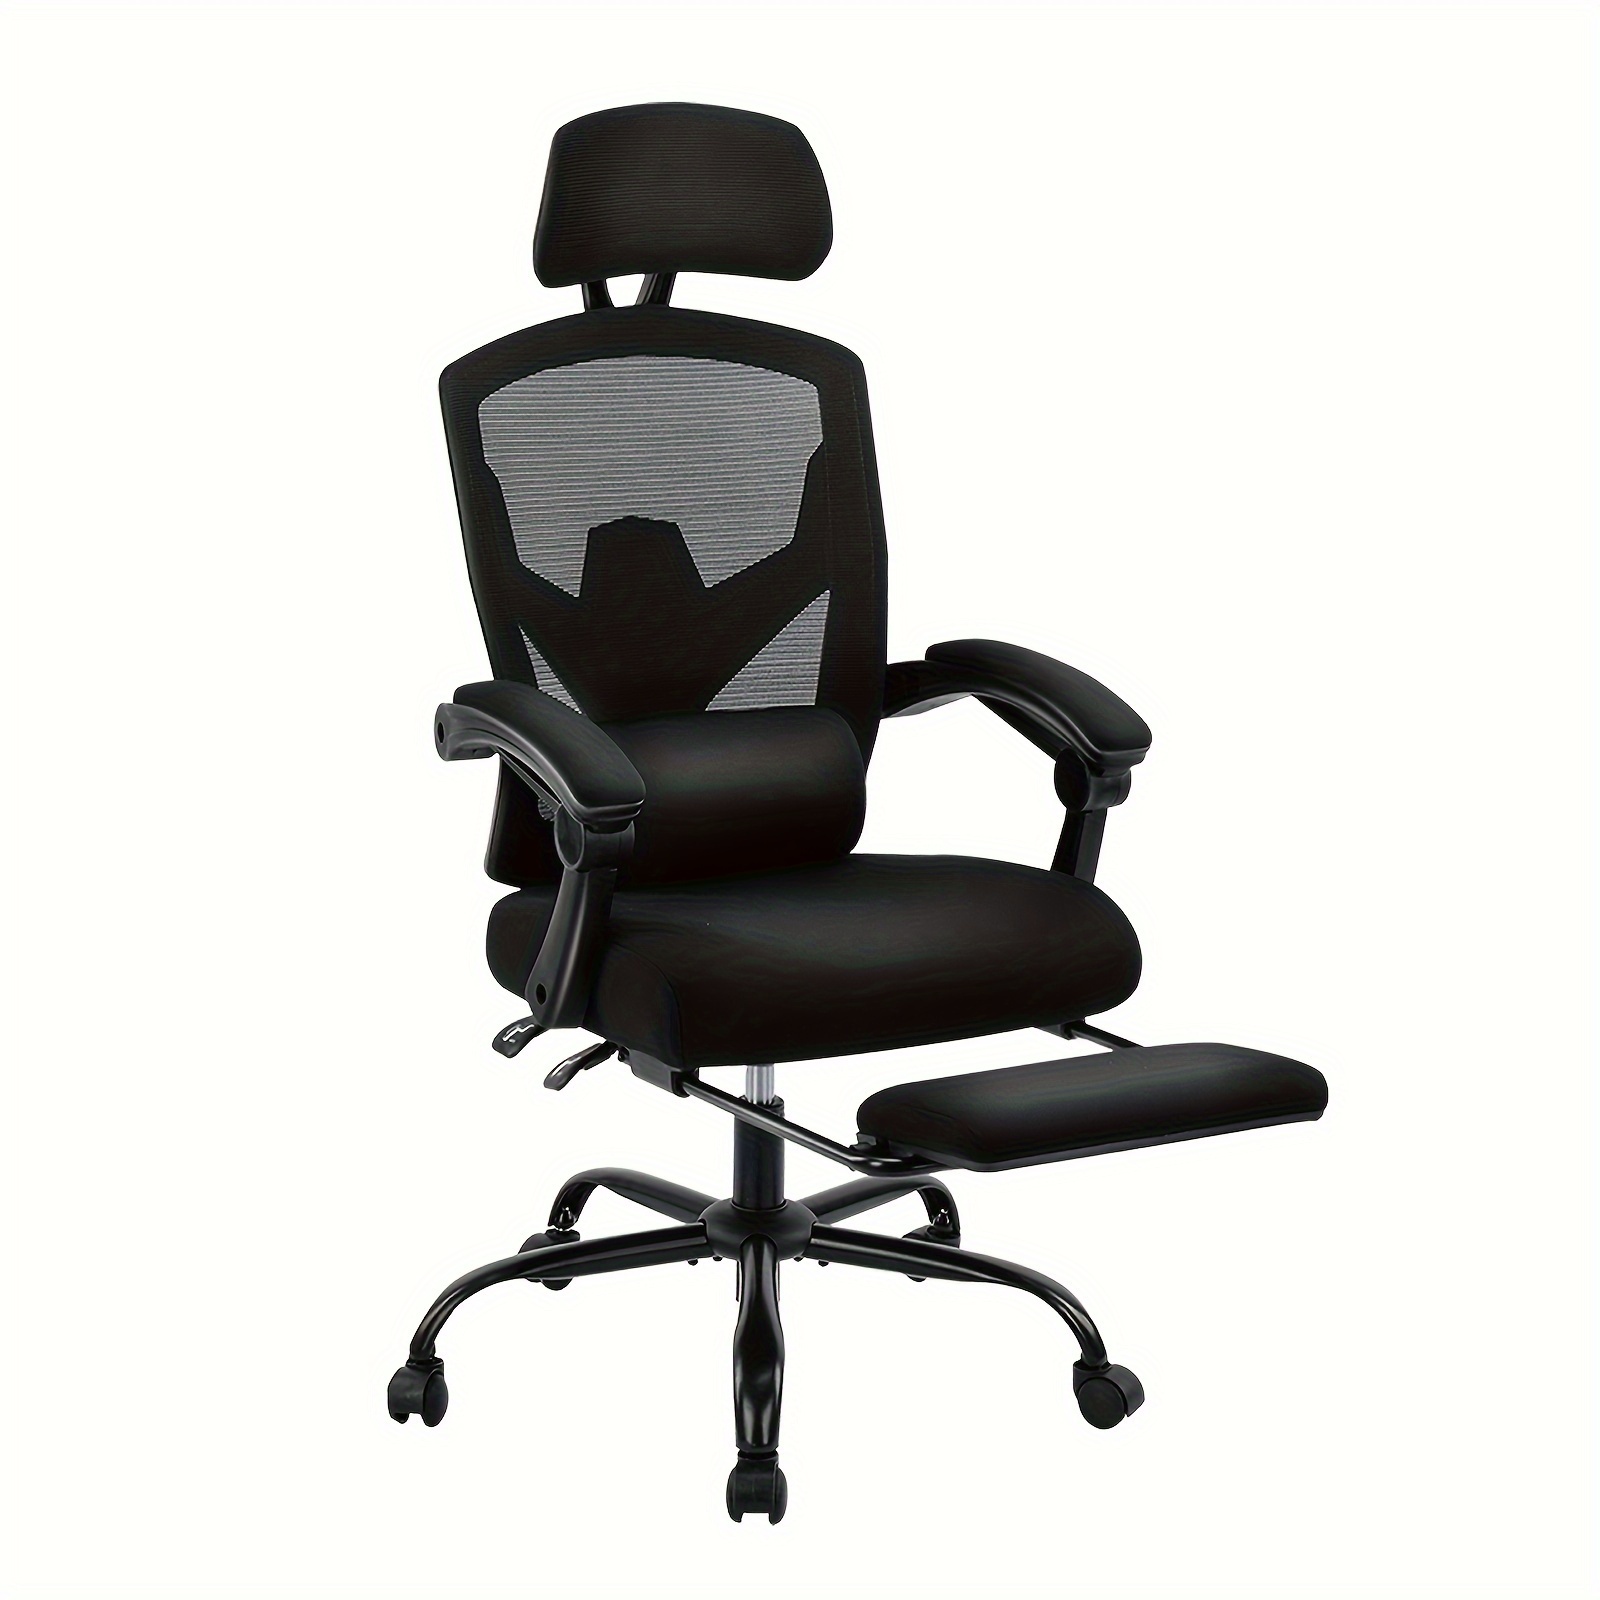 

Ergonomic Office High Back Reclining Desk Footrest, Adjustable Height Executive Computer Leg Rest, Big And Tall Task Chair With Lumbar Support, Black, White, Blue And Grey